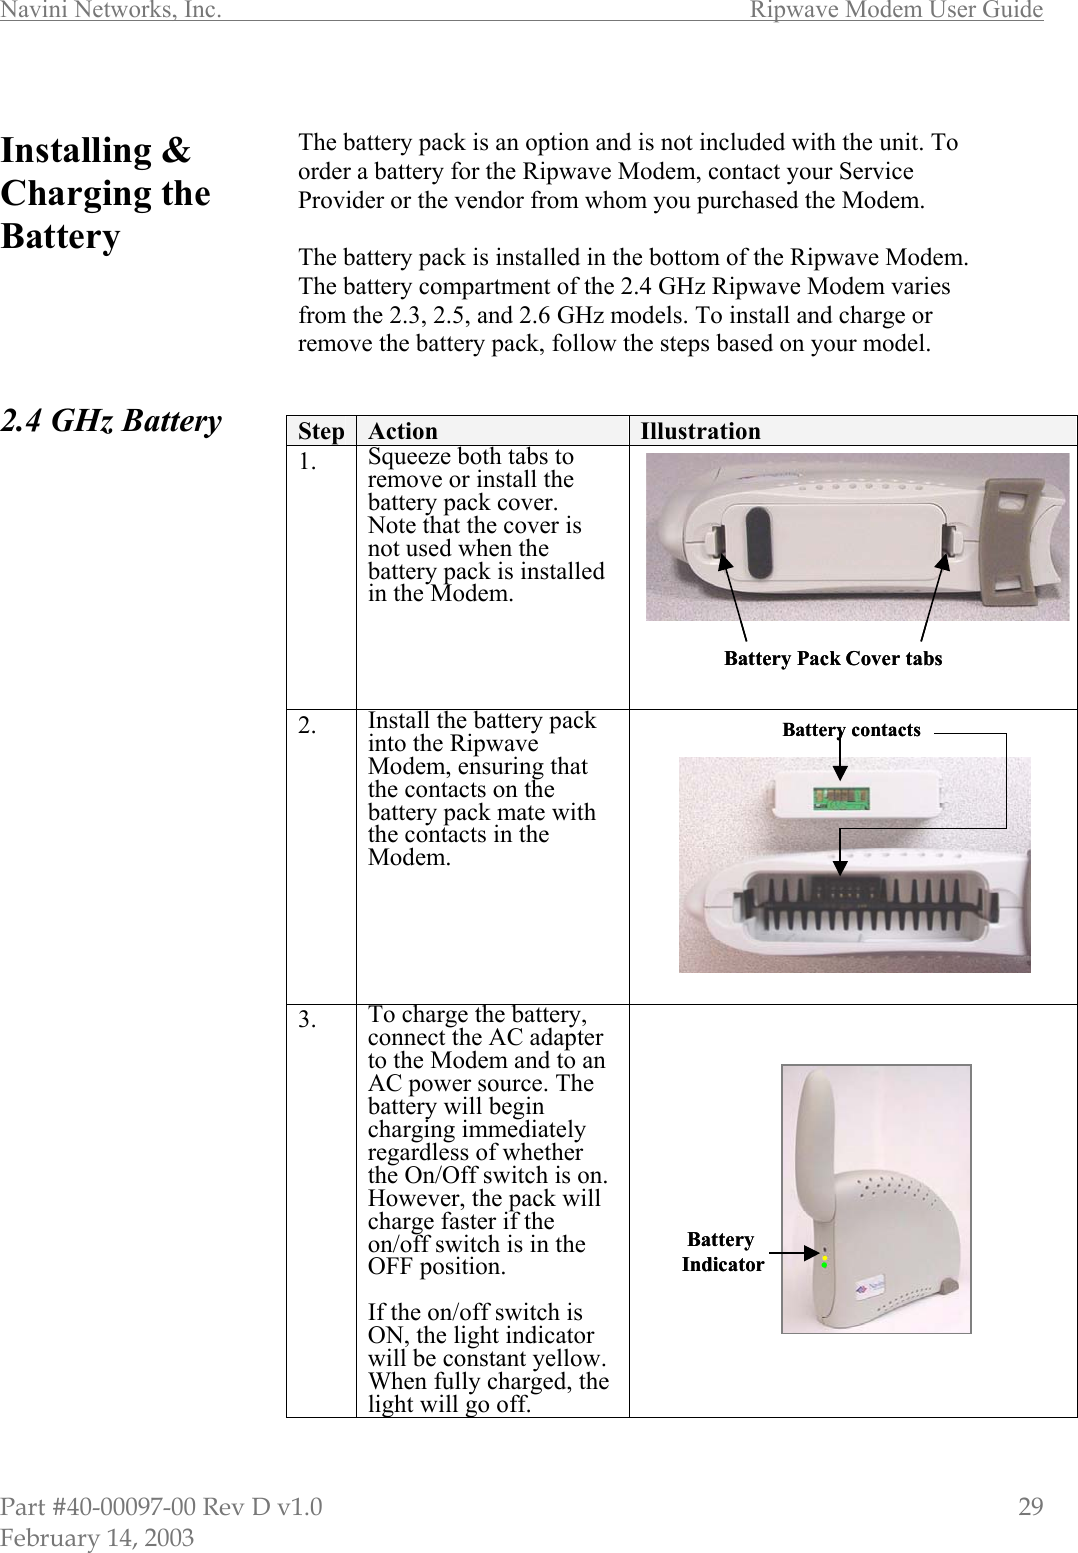 Navini Networks, Inc.        Ripwave Modem User Guide Part #40-00097-00 Rev D v1.0                         29 February 14, 2003  Installing &amp; Charging the Battery      2.4 GHz Battery                                     The battery pack is an option and is not included with the unit. To order a battery for the Ripwave Modem, contact your Service Provider or the vendor from whom you purchased the Modem.  The battery pack is installed in the bottom of the Ripwave Modem. The battery compartment of the 2.4 GHz Ripwave Modem varies from the 2.3, 2.5, and 2.6 GHz models. To install and charge or remove the battery pack, follow the steps based on your model.   Step  Action  Illustration 1.  Squeeze both tabs to remove or install the battery pack cover.  Note that the cover is not used when the battery pack is installed in the Modem.  2.  Install the battery pack into the Ripwave Modem, ensuring that the contacts on the battery pack mate with the contacts in the Modem.  3.  To charge the battery, connect the AC adapter to the Modem and to an AC power source. The battery will begin charging immediately regardless of whether the On/Off switch is on. However, the pack will charge faster if the on/off switch is in the OFF position.  If the on/off switch is ON, the light indicator will be constant yellow. When fully charged, the light will go off.   Battery contactsBattery contactsBattery Pack Cover tabsBattery Pack Cover tabs. ..BatteryIndicator . ..BatteryIndicator